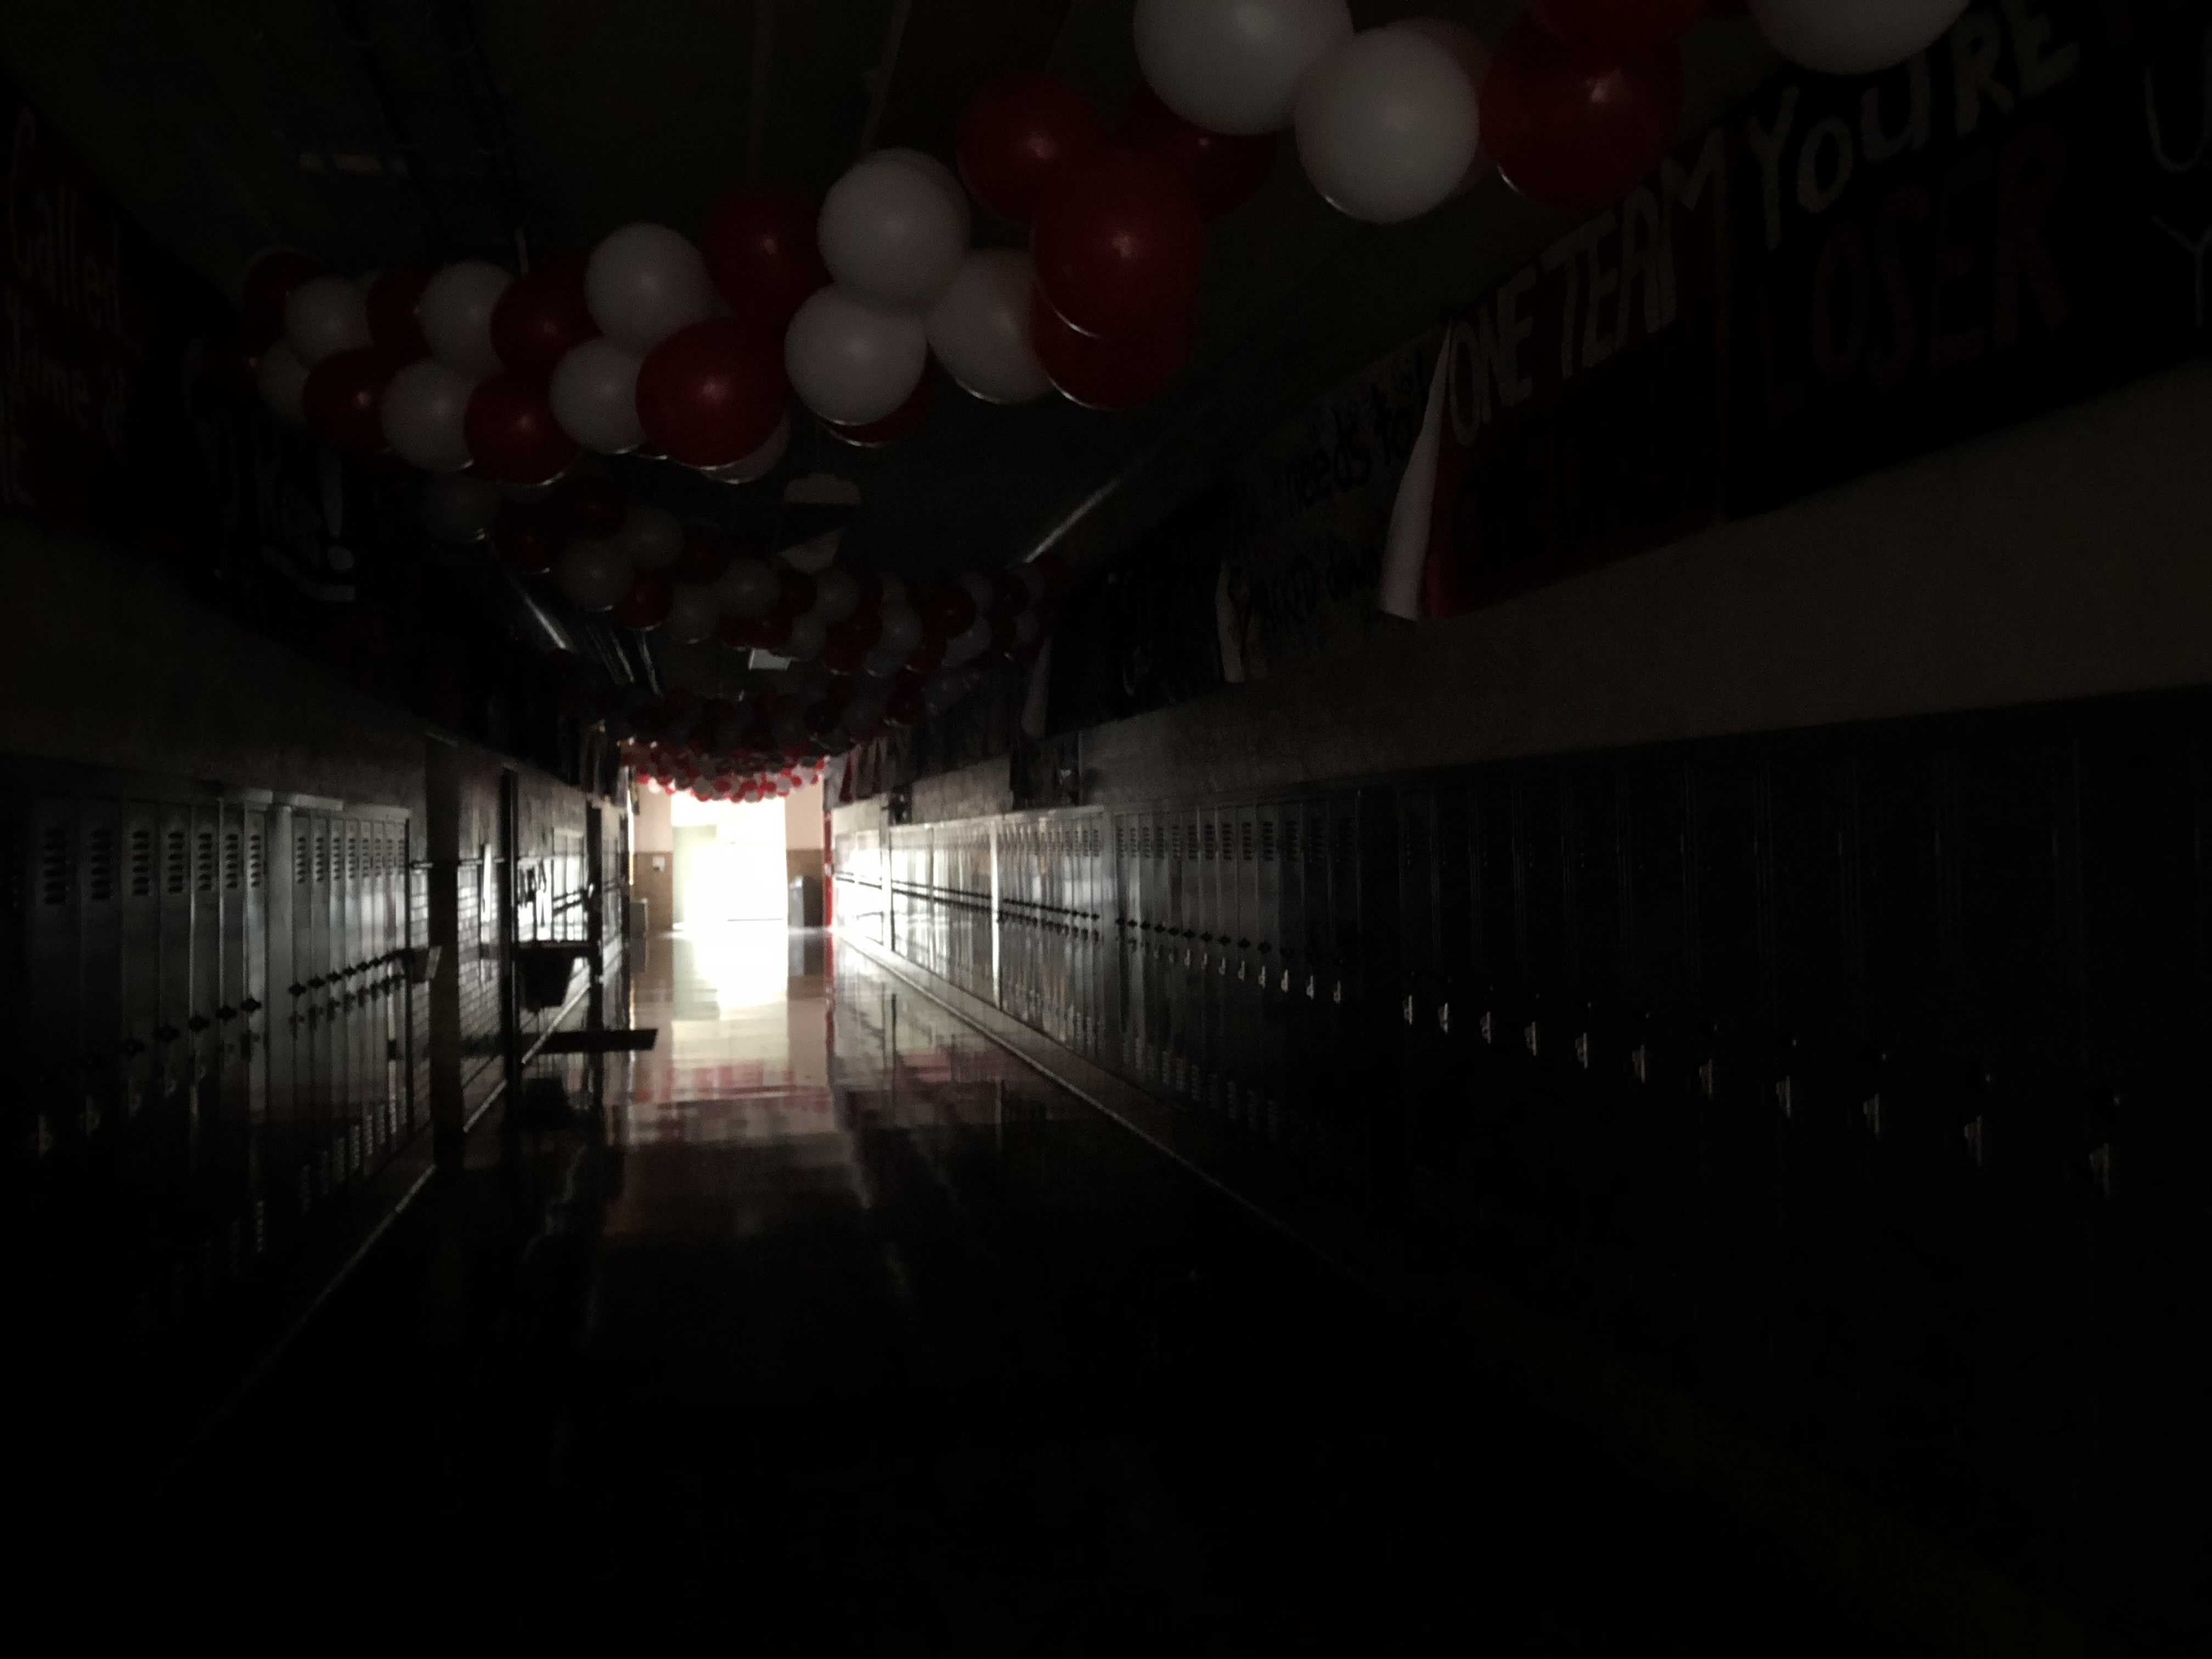 Even some emergency backup lights werent working when Manual lost power, leaving several hallways completely dark. Photo by Reece Gunther.